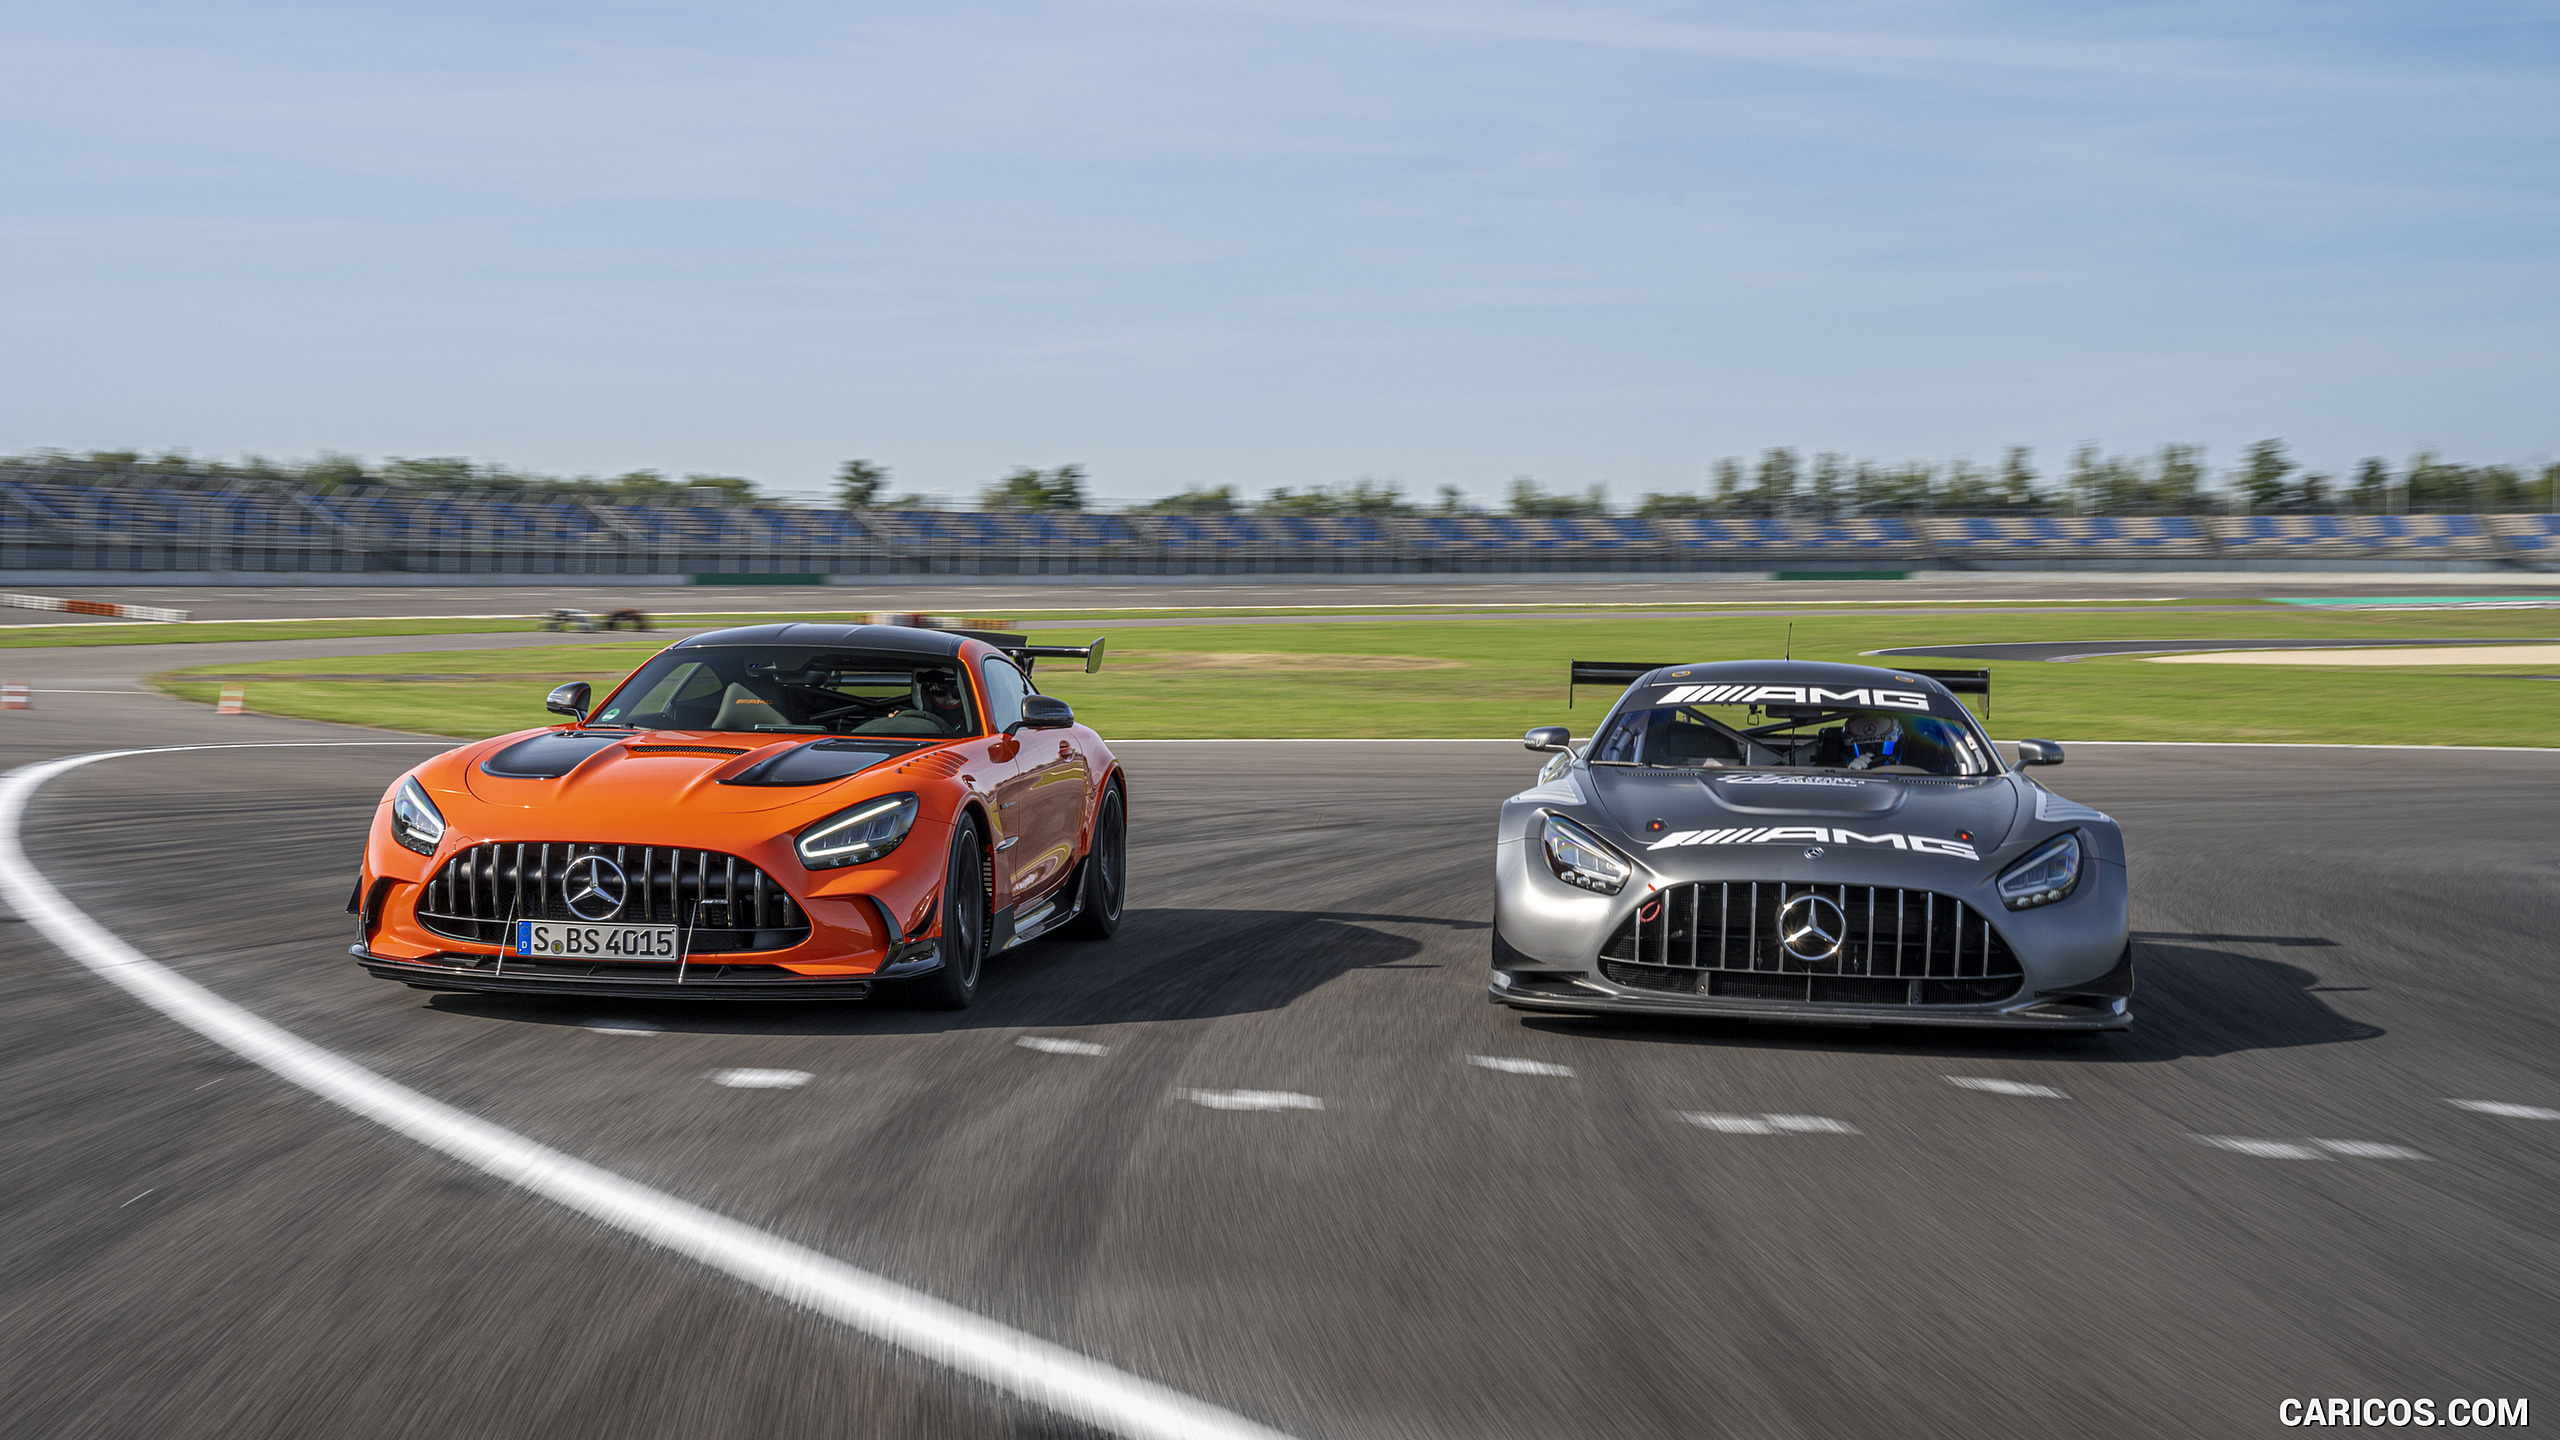 2021 Mercedes-AMG GT Black Series (Color: Magma Beam) and AMG GT3 Racing Car, #144 of 215